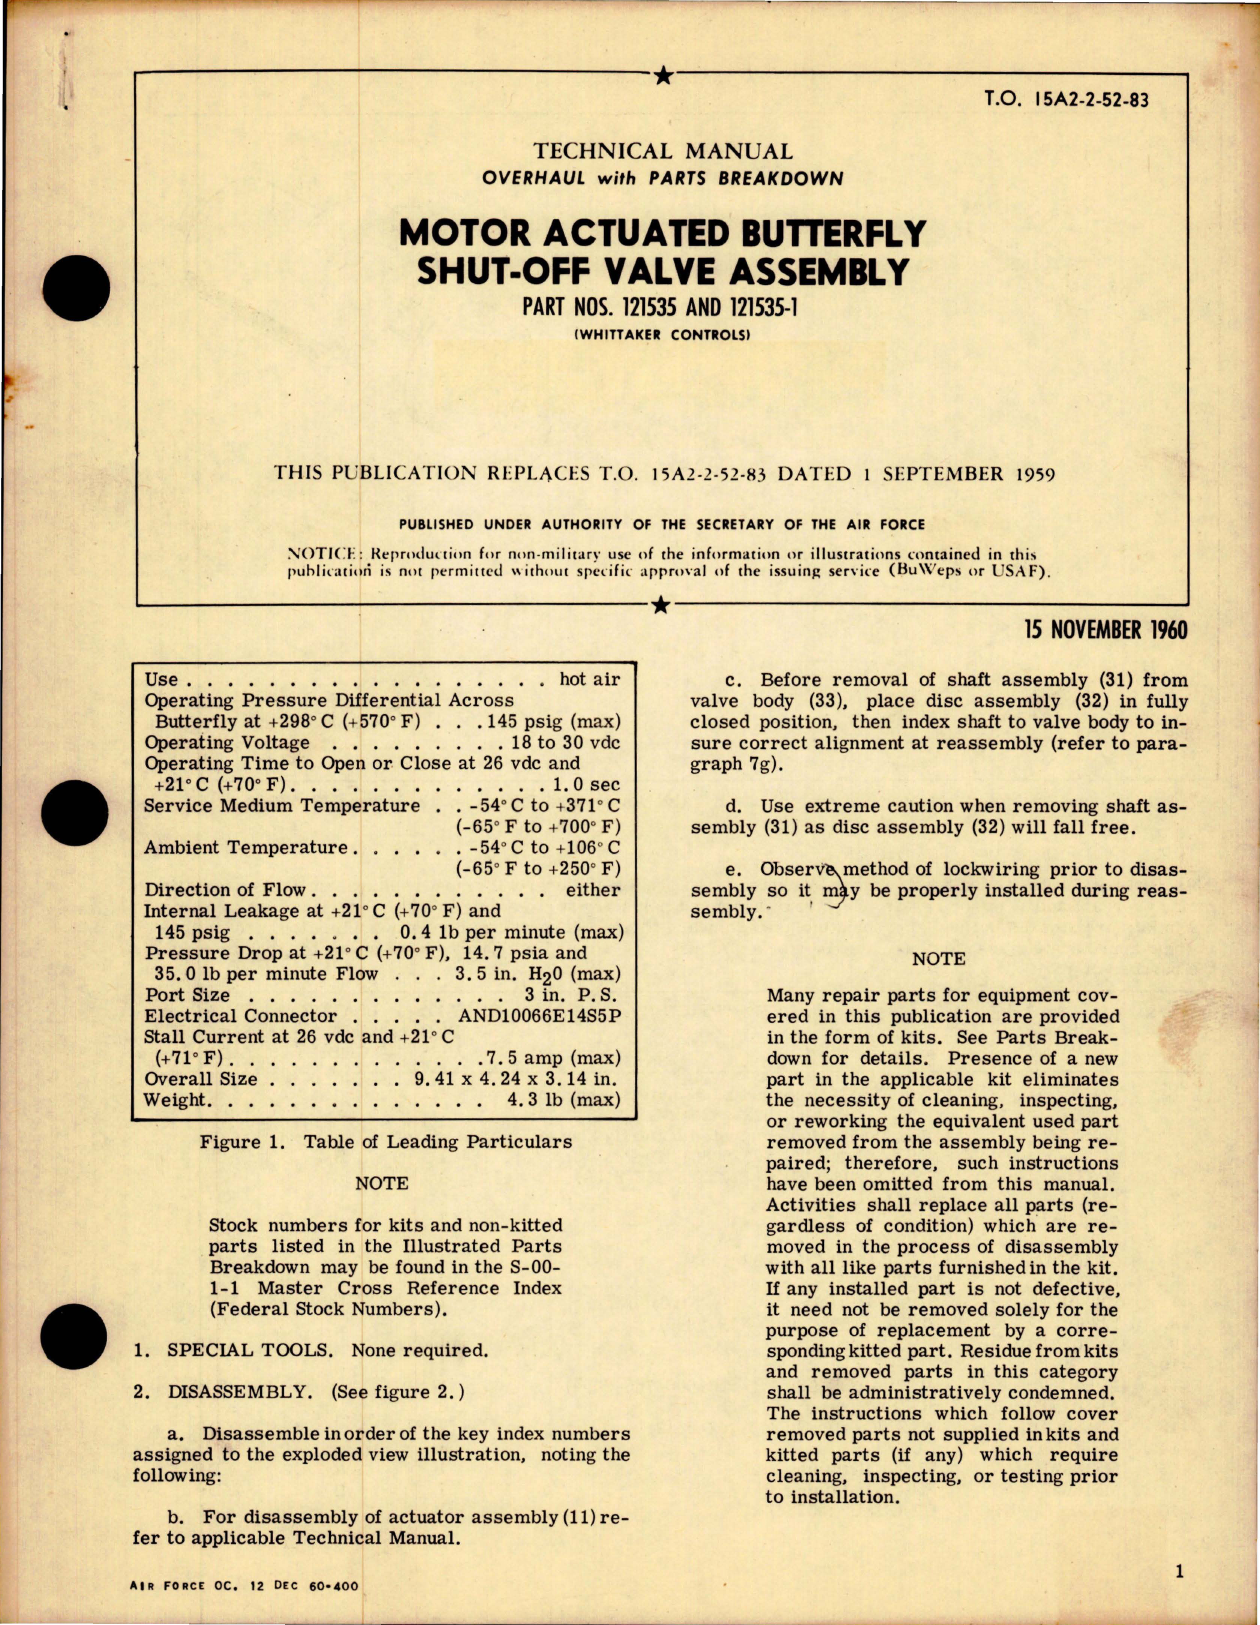 Sample page 1 from AirCorps Library document: Overhaul with Parts Breakdown for Motor Actuated Butterfly Shut-Off Valve Assembly - Parts 121535 and 121535-1 